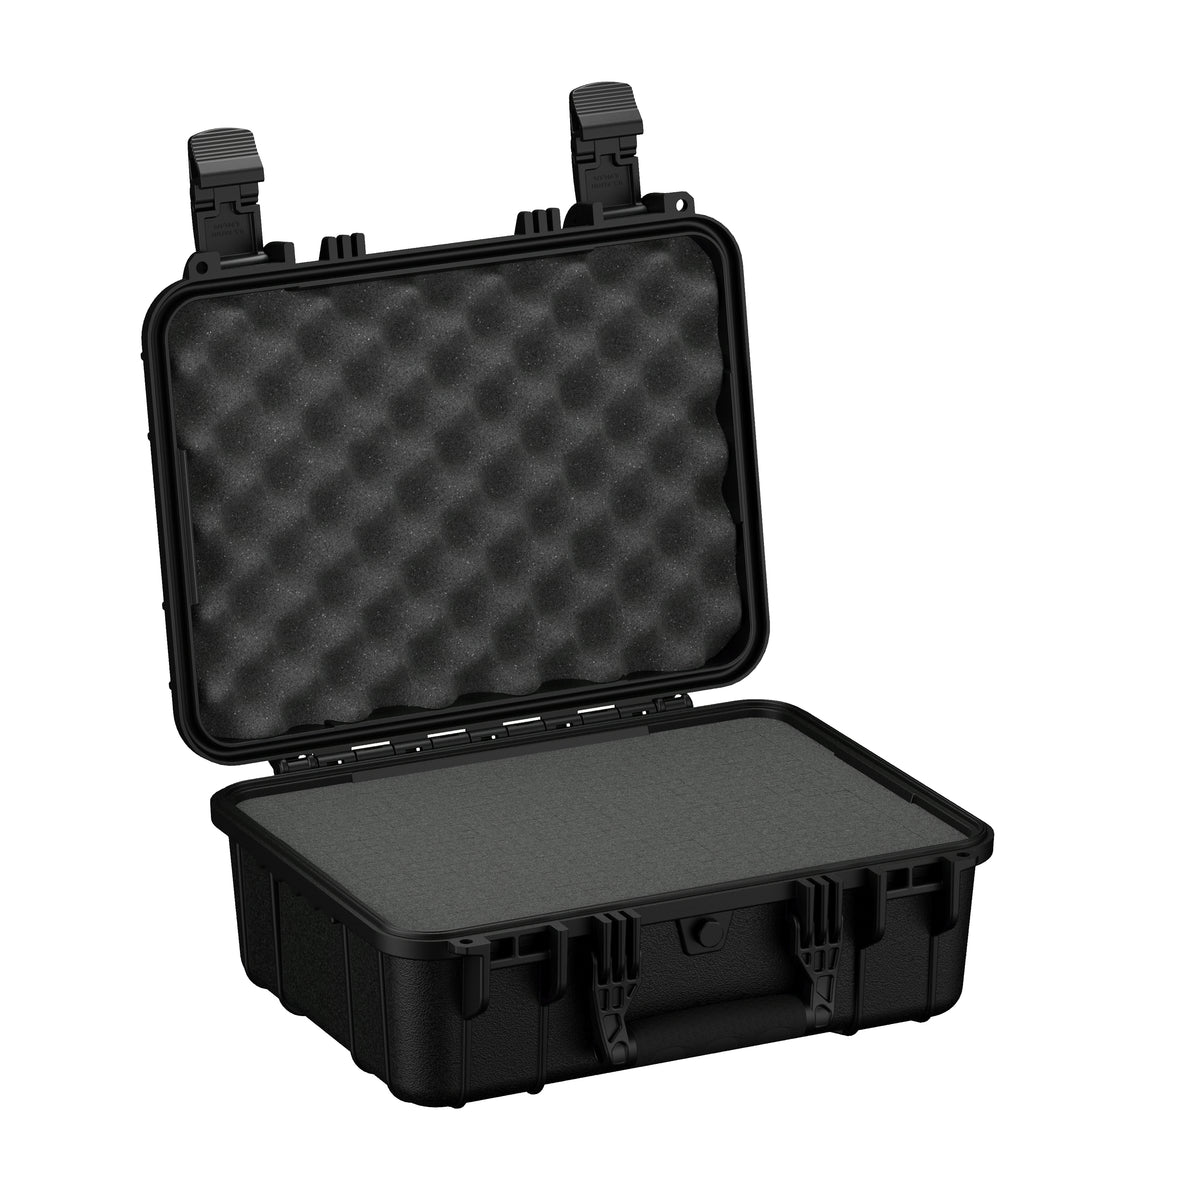 Plano Case 42 108421 Replacement Convoluted Lid Foam Insert (1 Piece) —  Cobra Foam Inserts and Cases